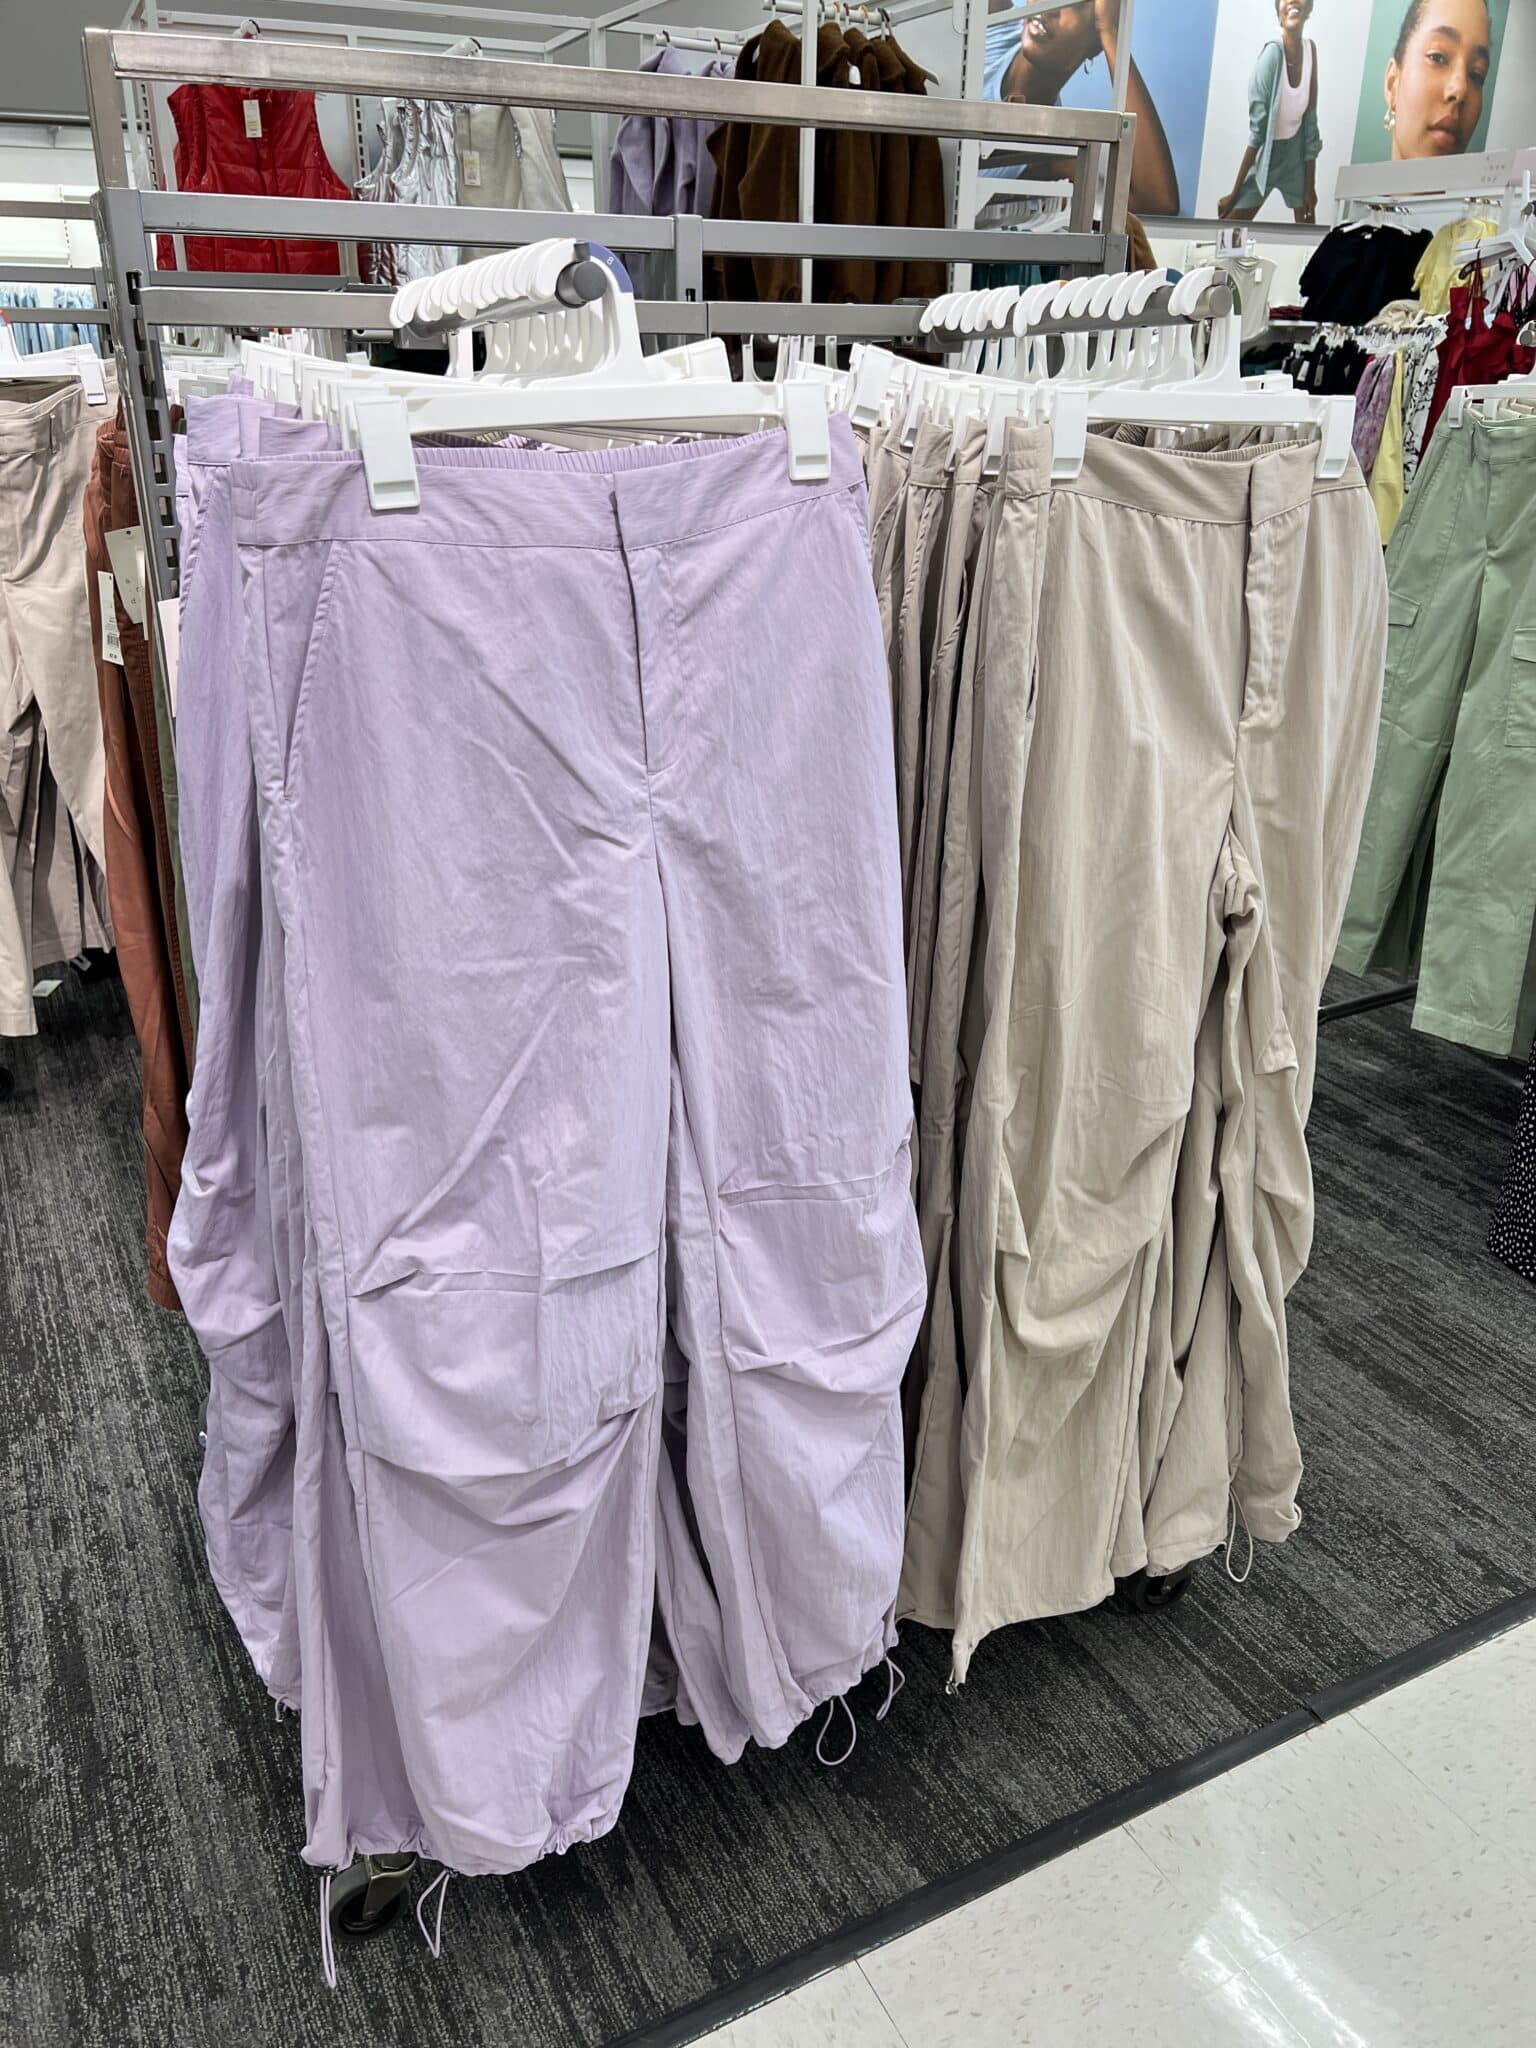 Gen Z parachute pants, affordable fashion, Spring Target Finds, Stilettos and Diapers